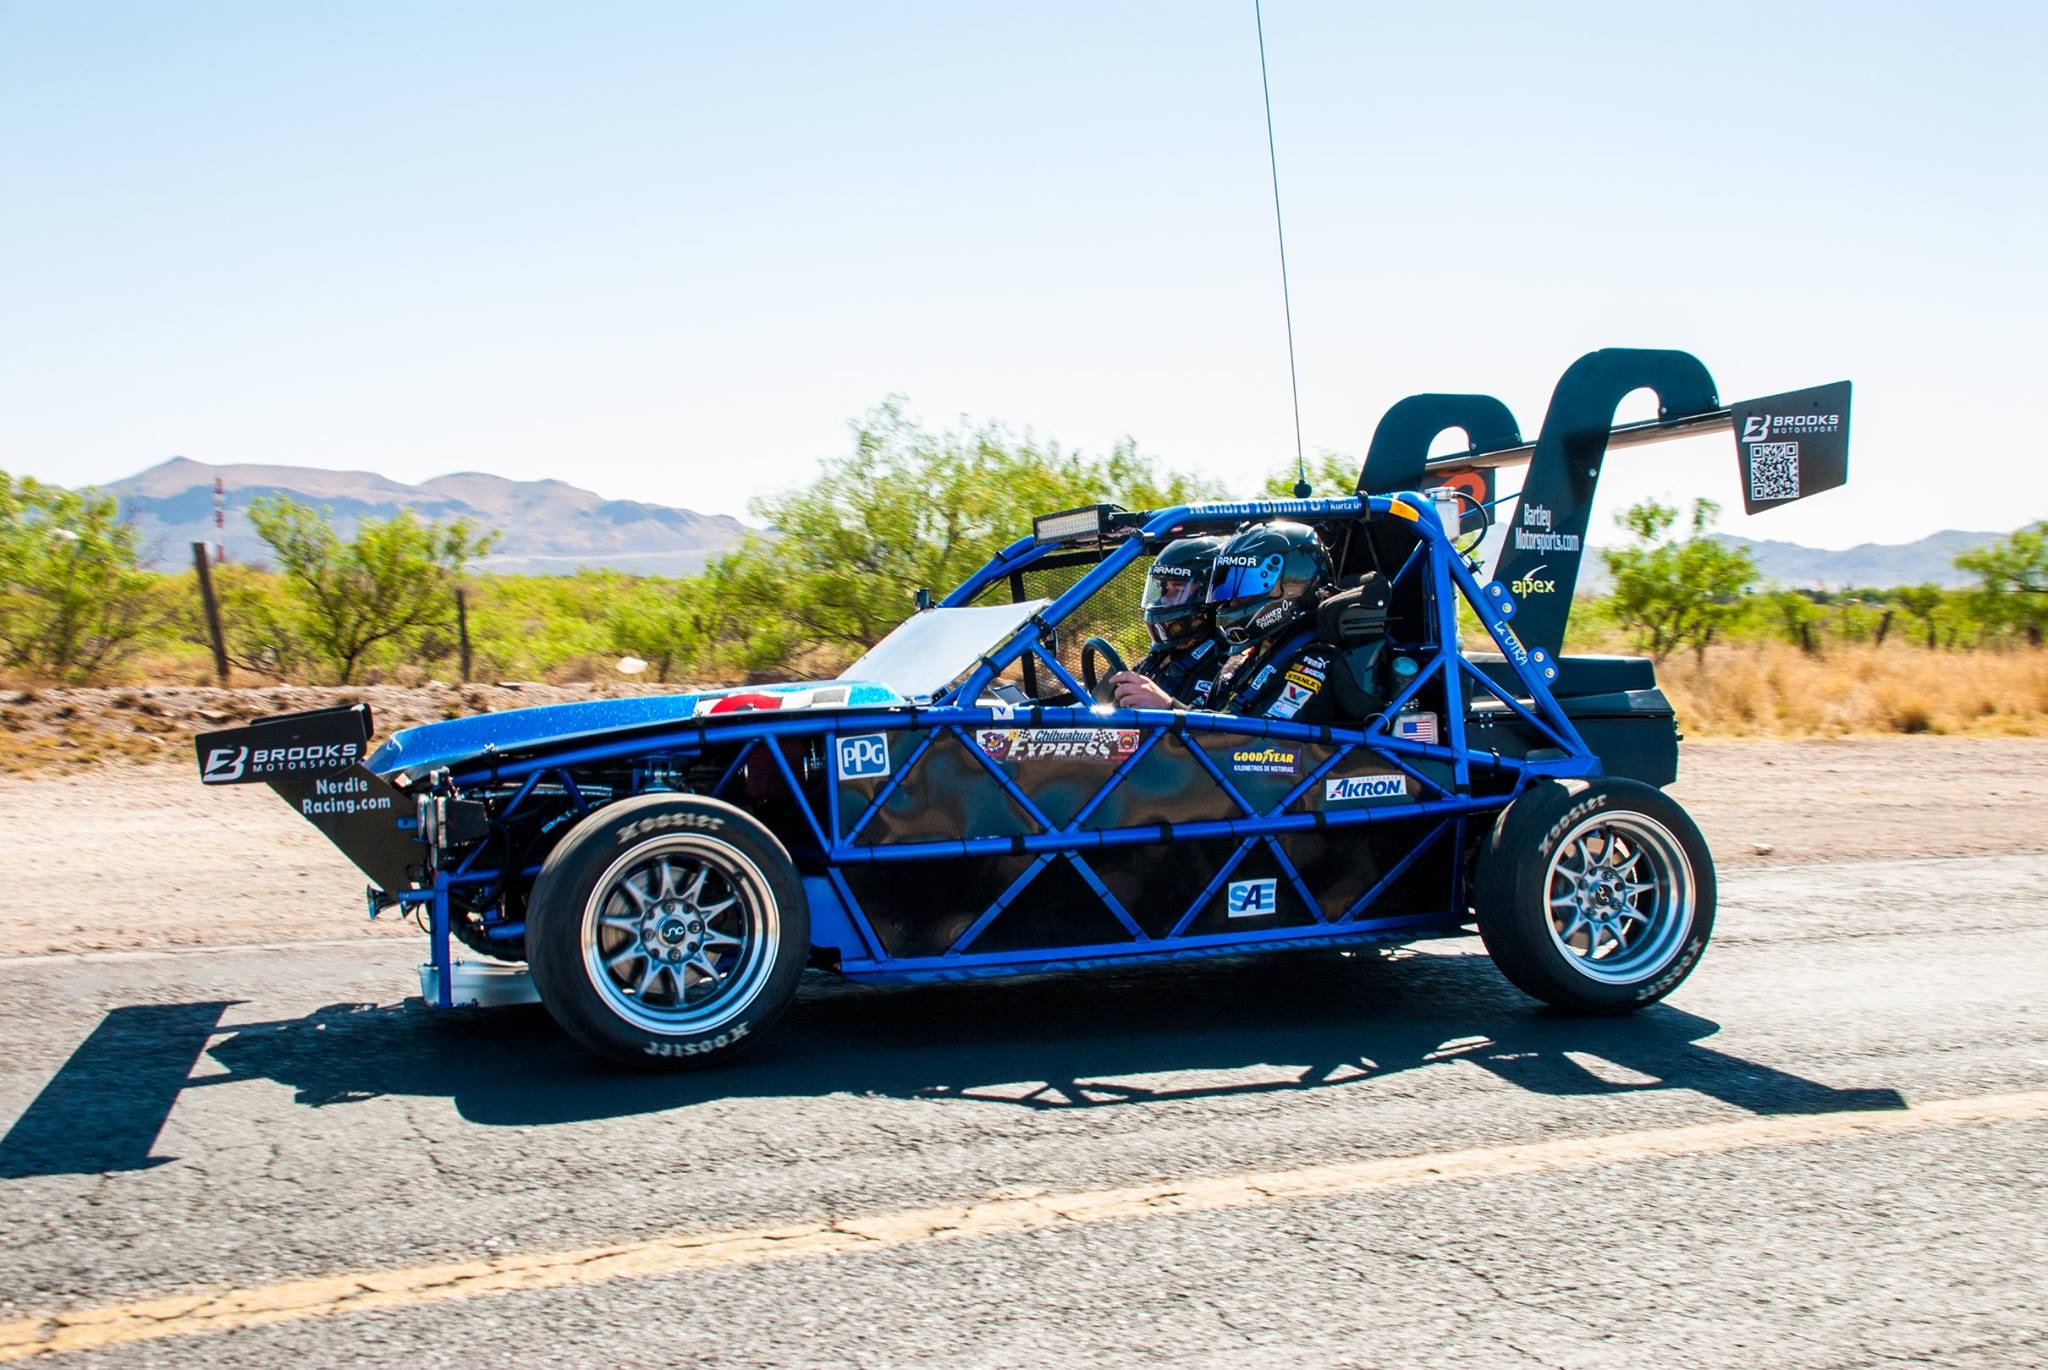 An Exocet contender in the Pikes Peak International Hill Climb!